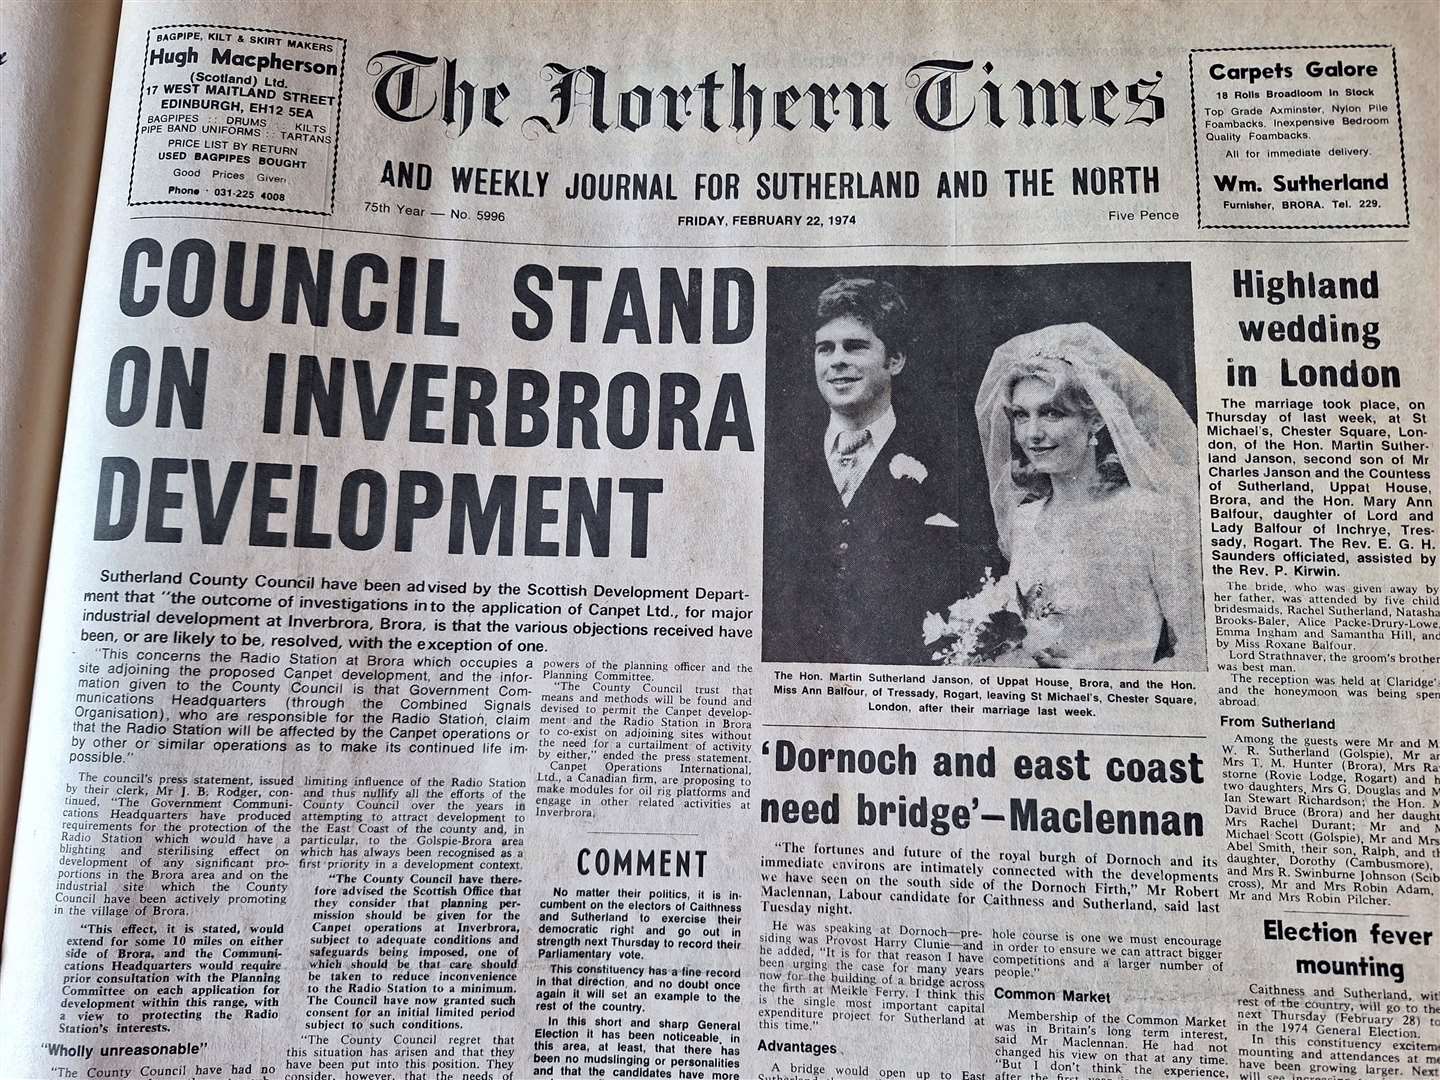 The edition of February 22, 1974